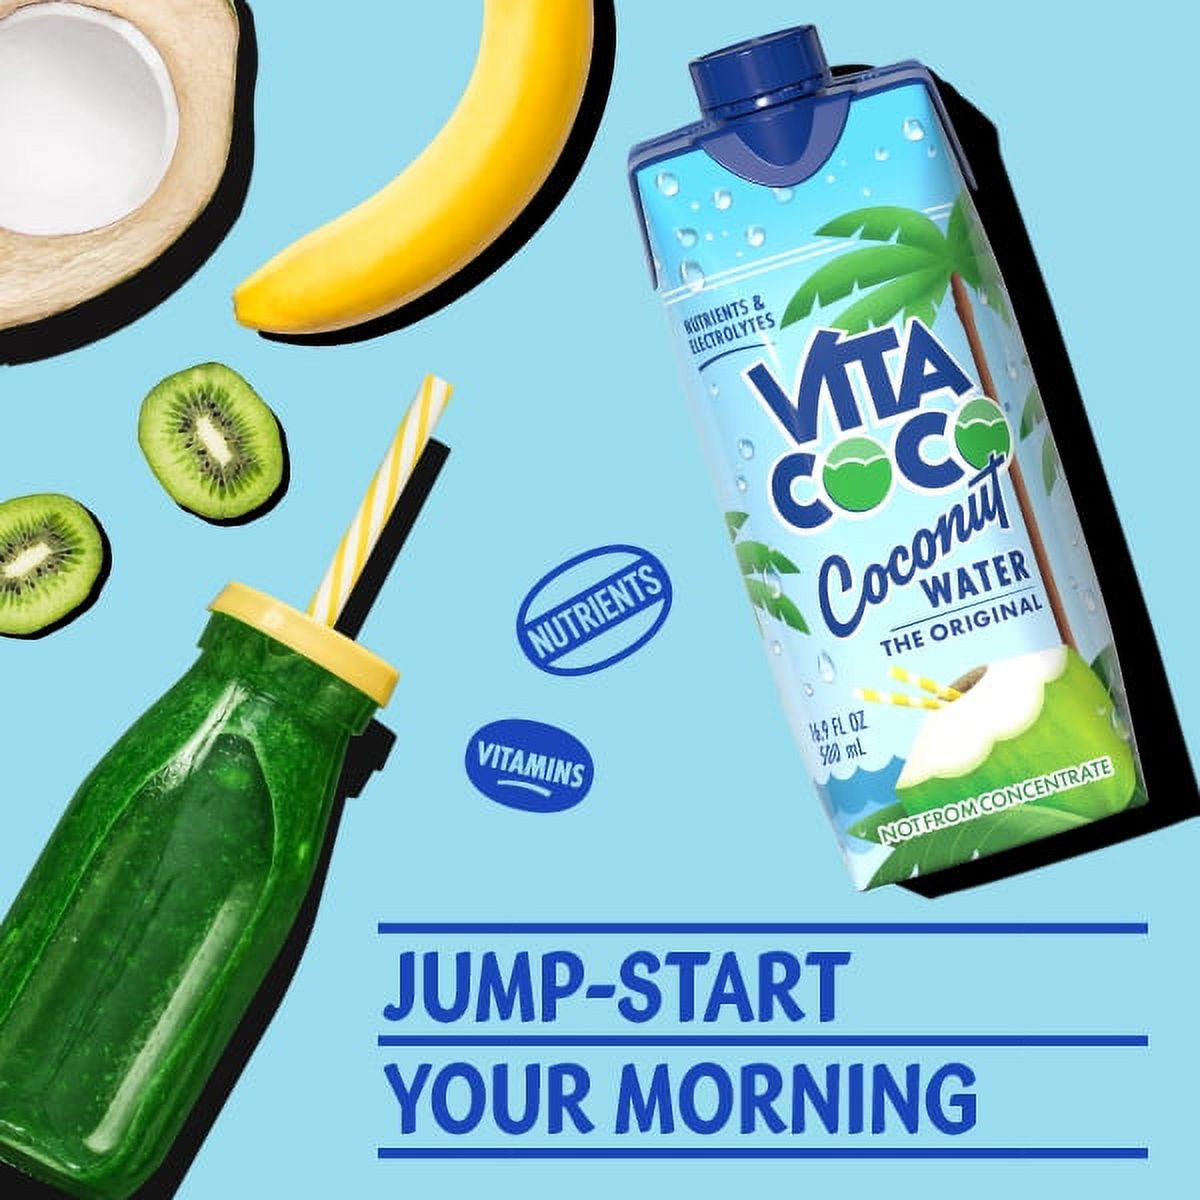 Vita Coco The Original Coconut Water, Nutrients & Electrolytes Rich, Pure, 16.9 fl oz Tetra, 4-Pack - image 5 of 8